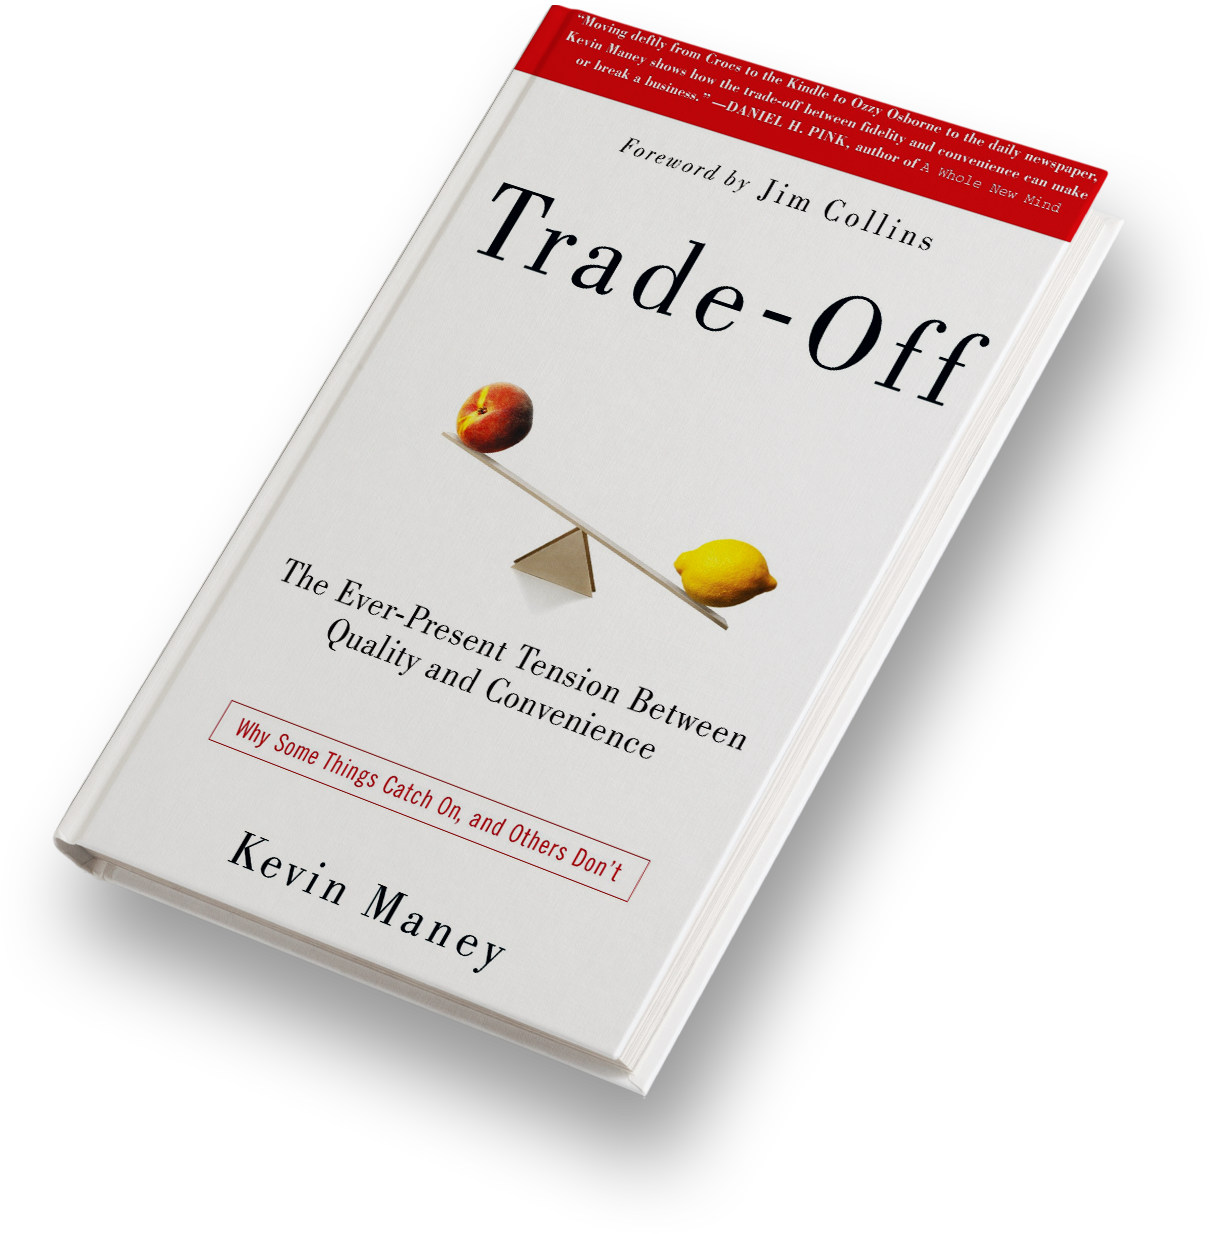 Trade-Off by Kevin Maney